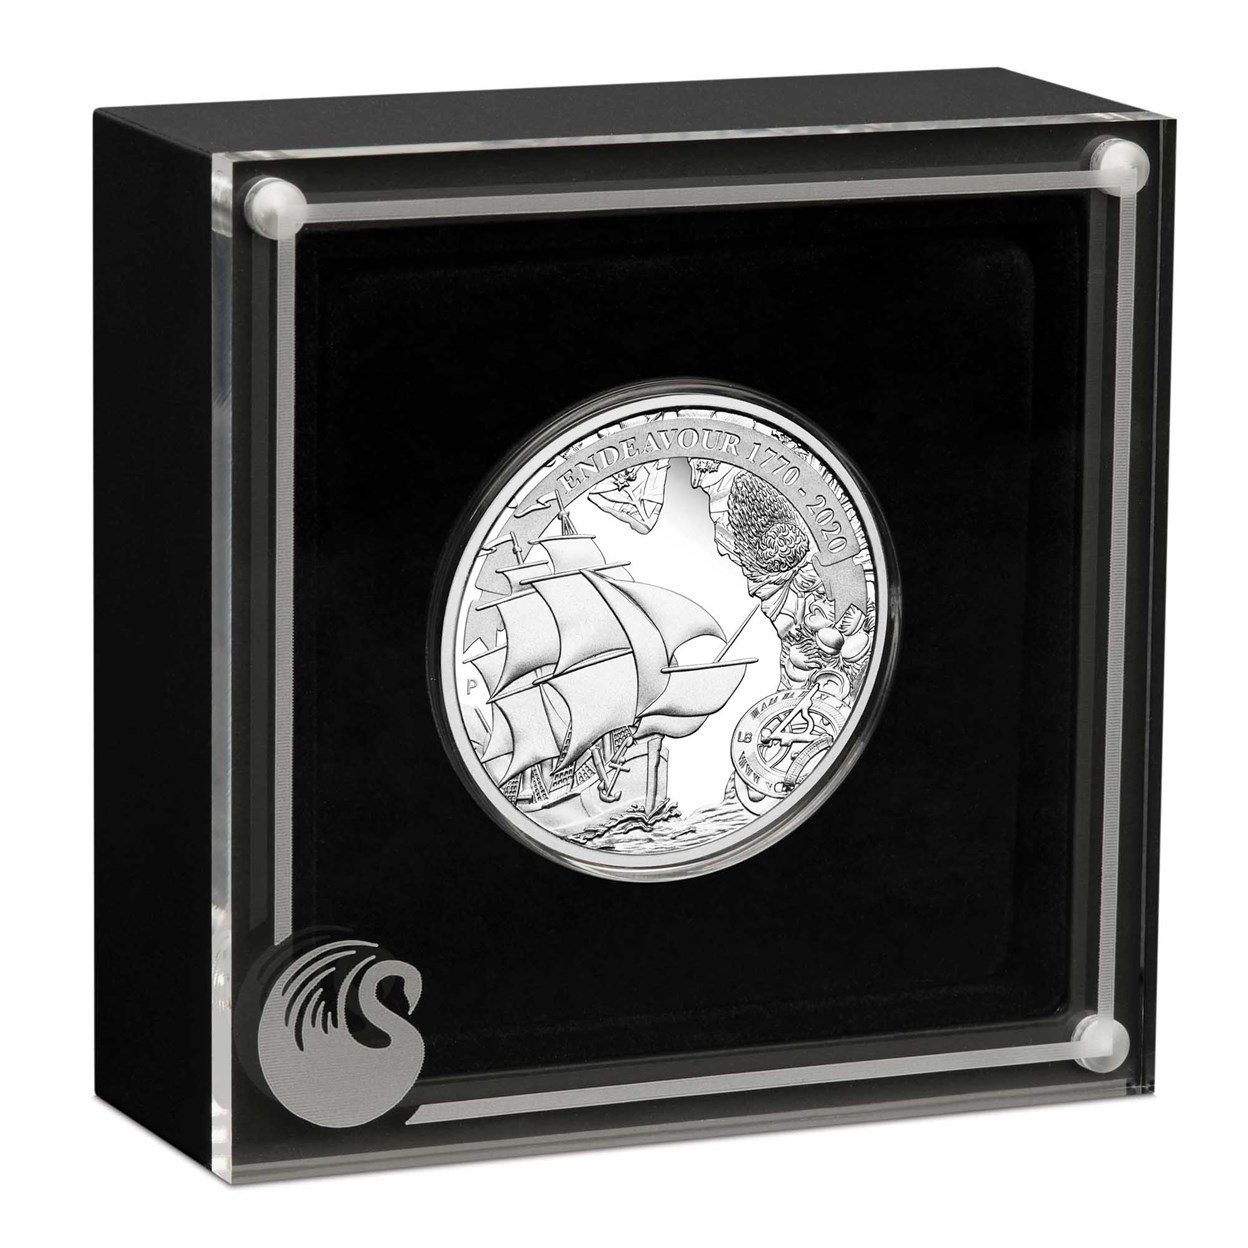 04 voyage of discovery endeavour 1770 2020 1oz silver proof InCase